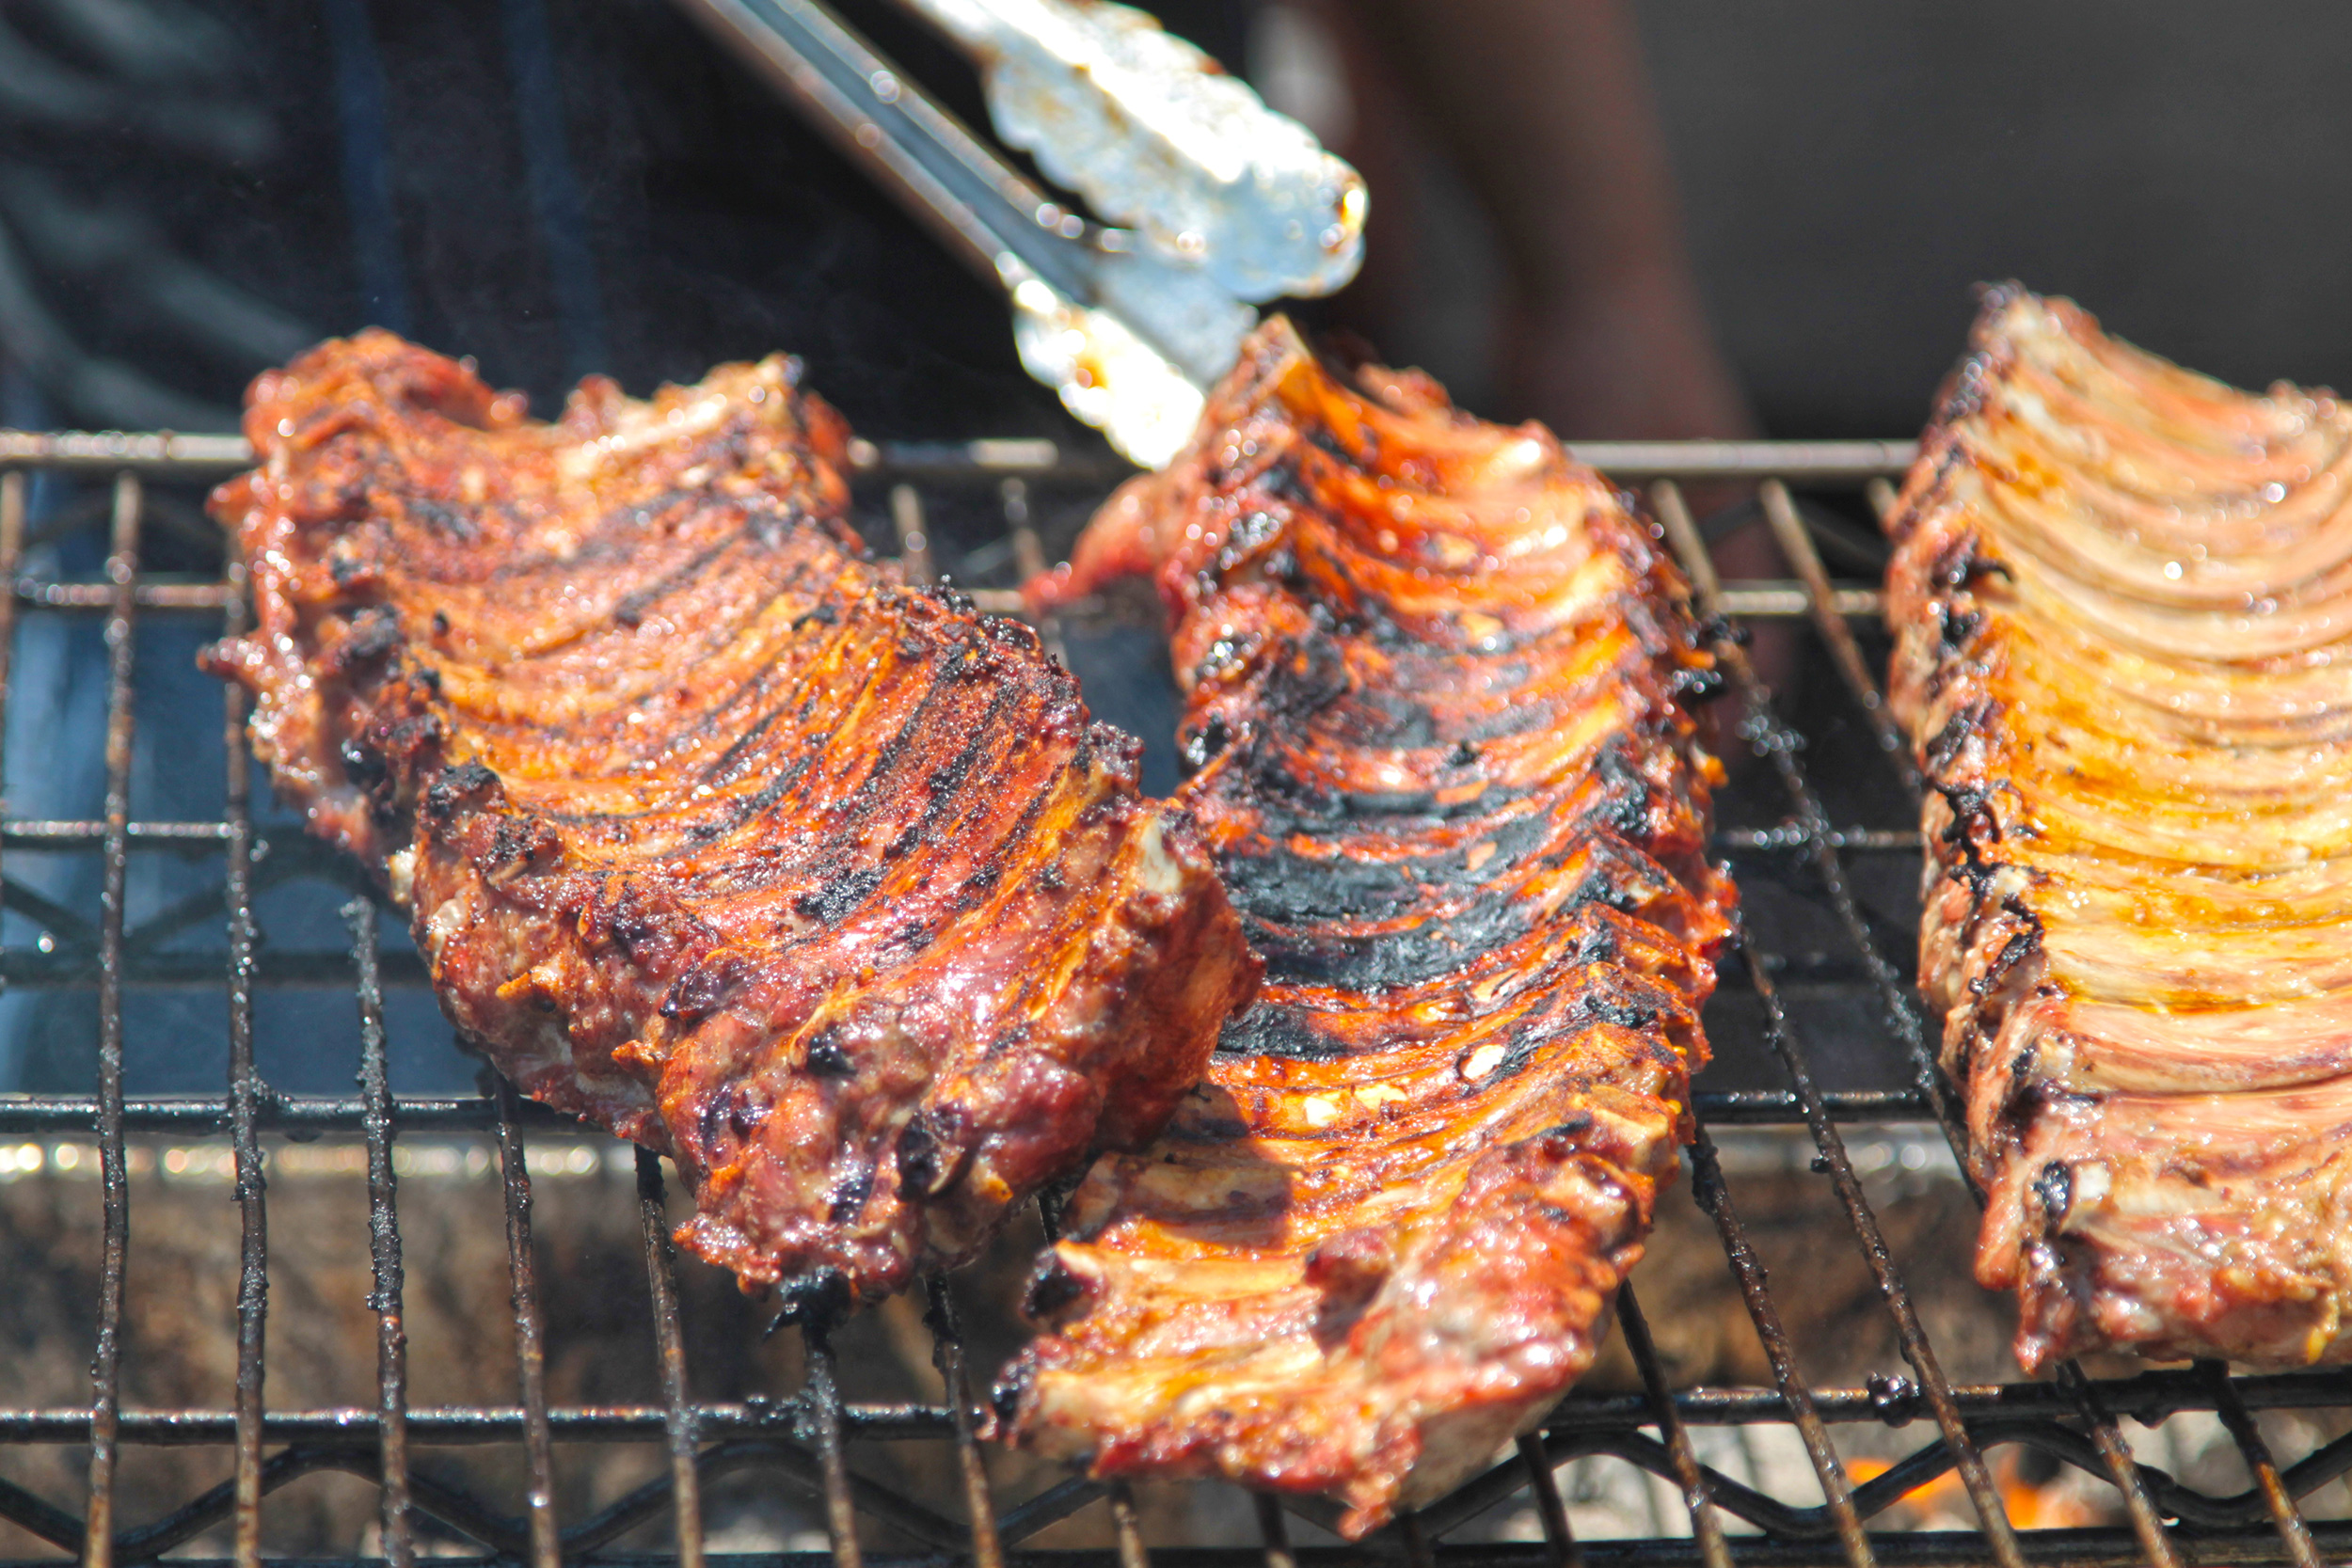 On June 22nd and 23rd, 2019, historic Pennsylvania Avenue, between 3rd and 7th Streets, NW, in Washington, DC will become the epicenter of BBQ perfection, bringing together delicious BBQ, delectable s